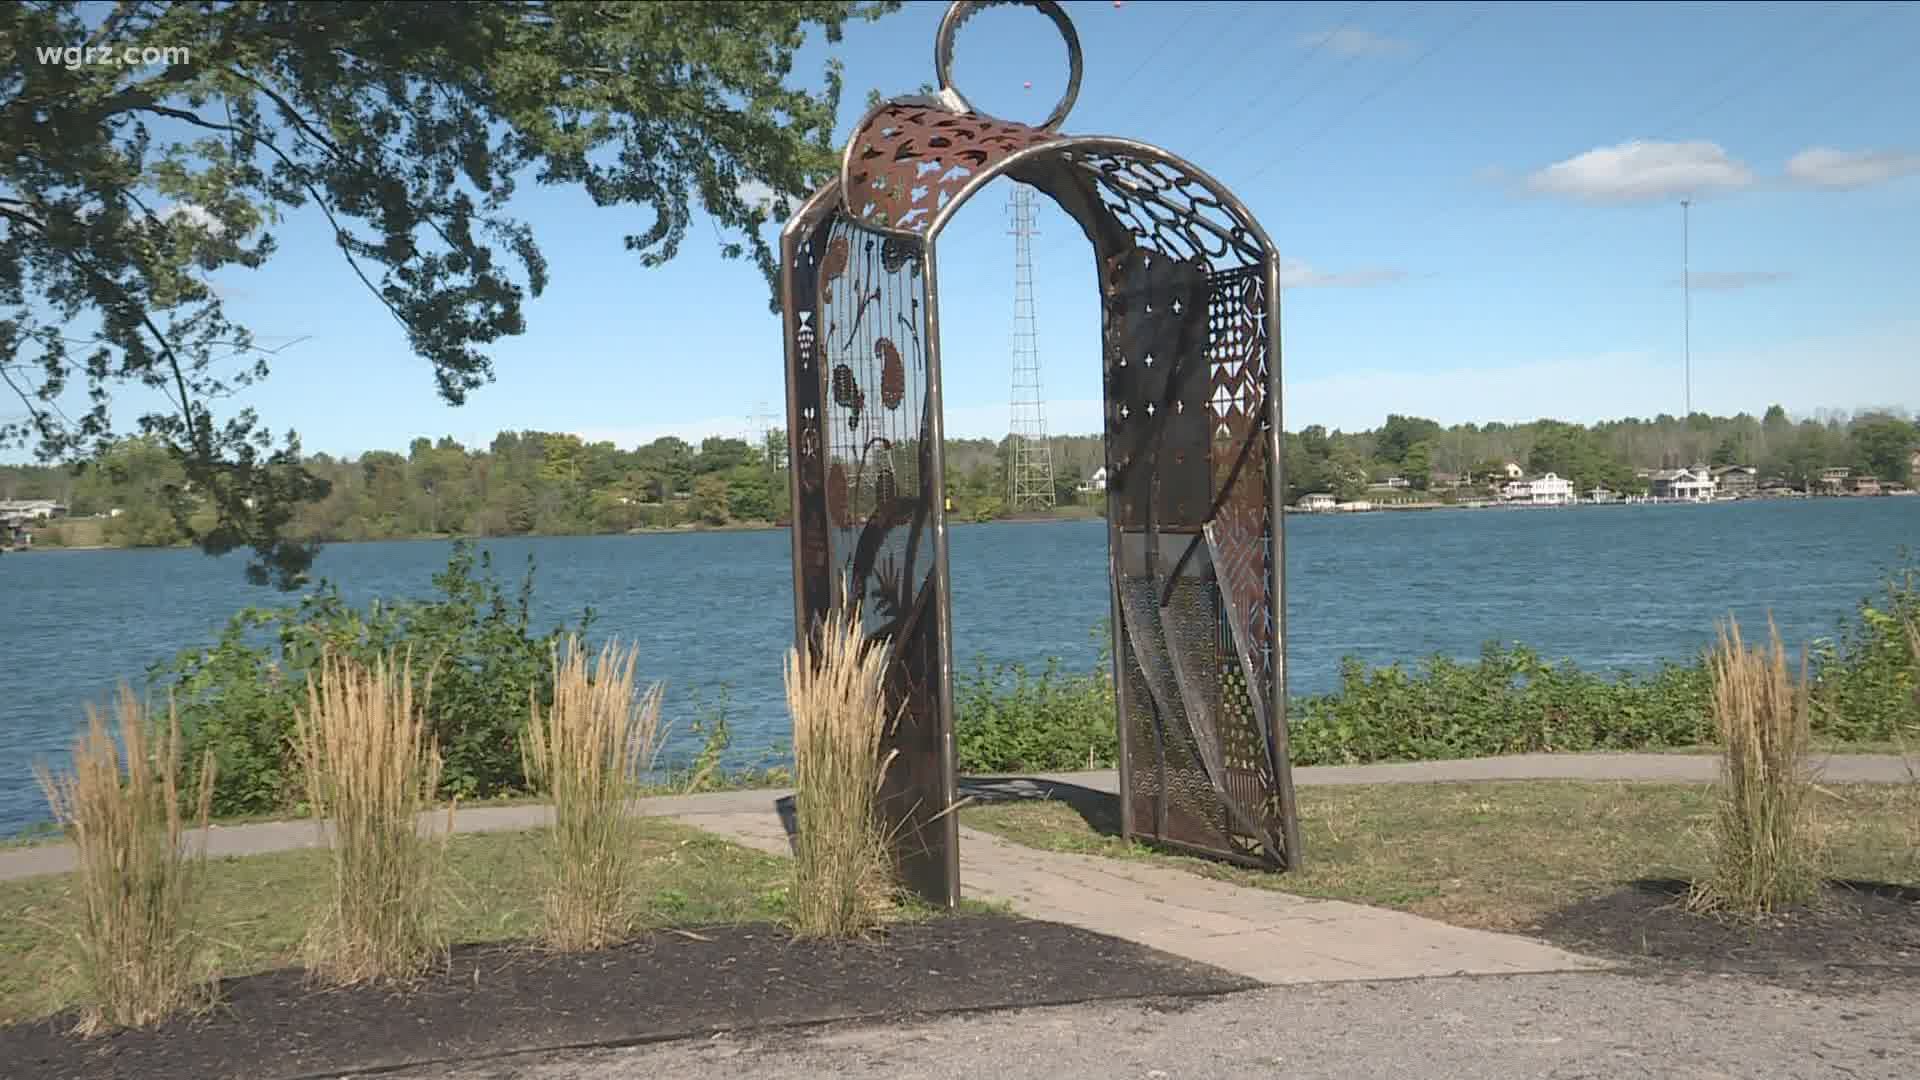 Erie County's Tribute Garden in Isle View Park is believed to be the first of its kind on public land. It's designed to raise awareness around domestic violence.